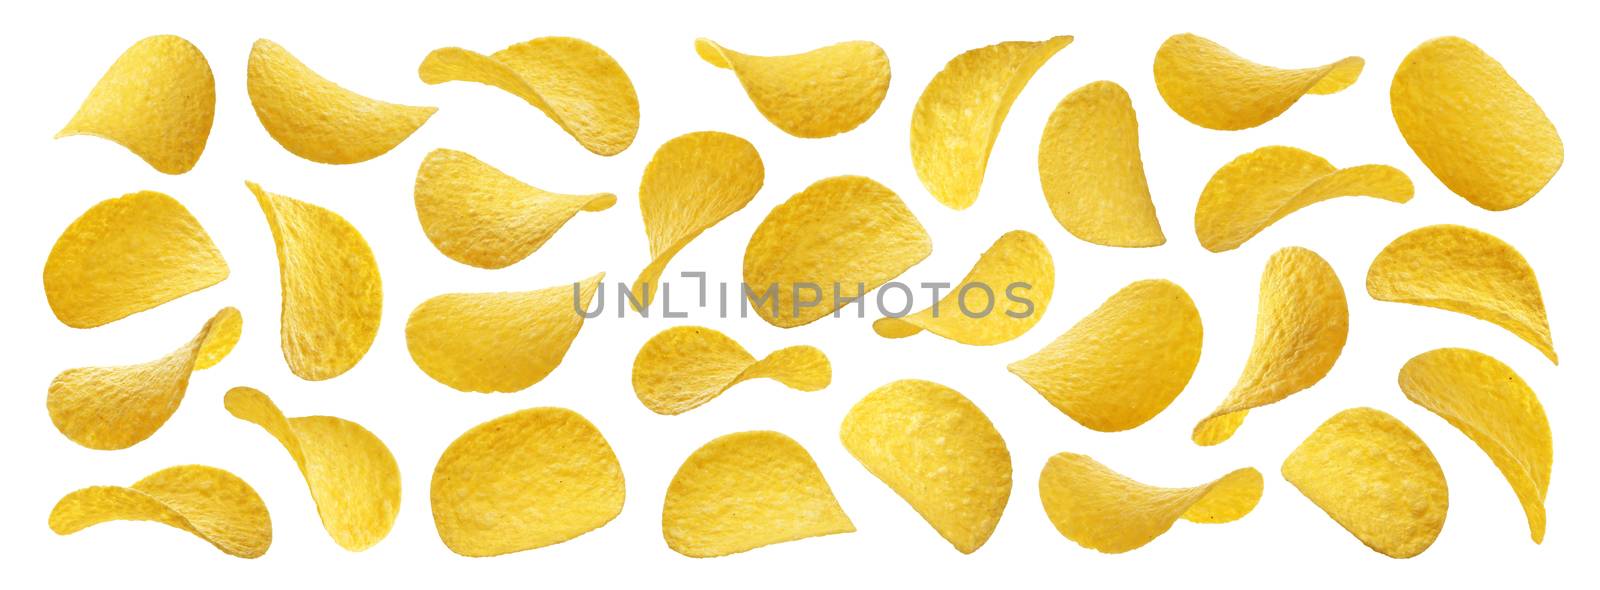 Potato chips isolated on white background, collection by xamtiw